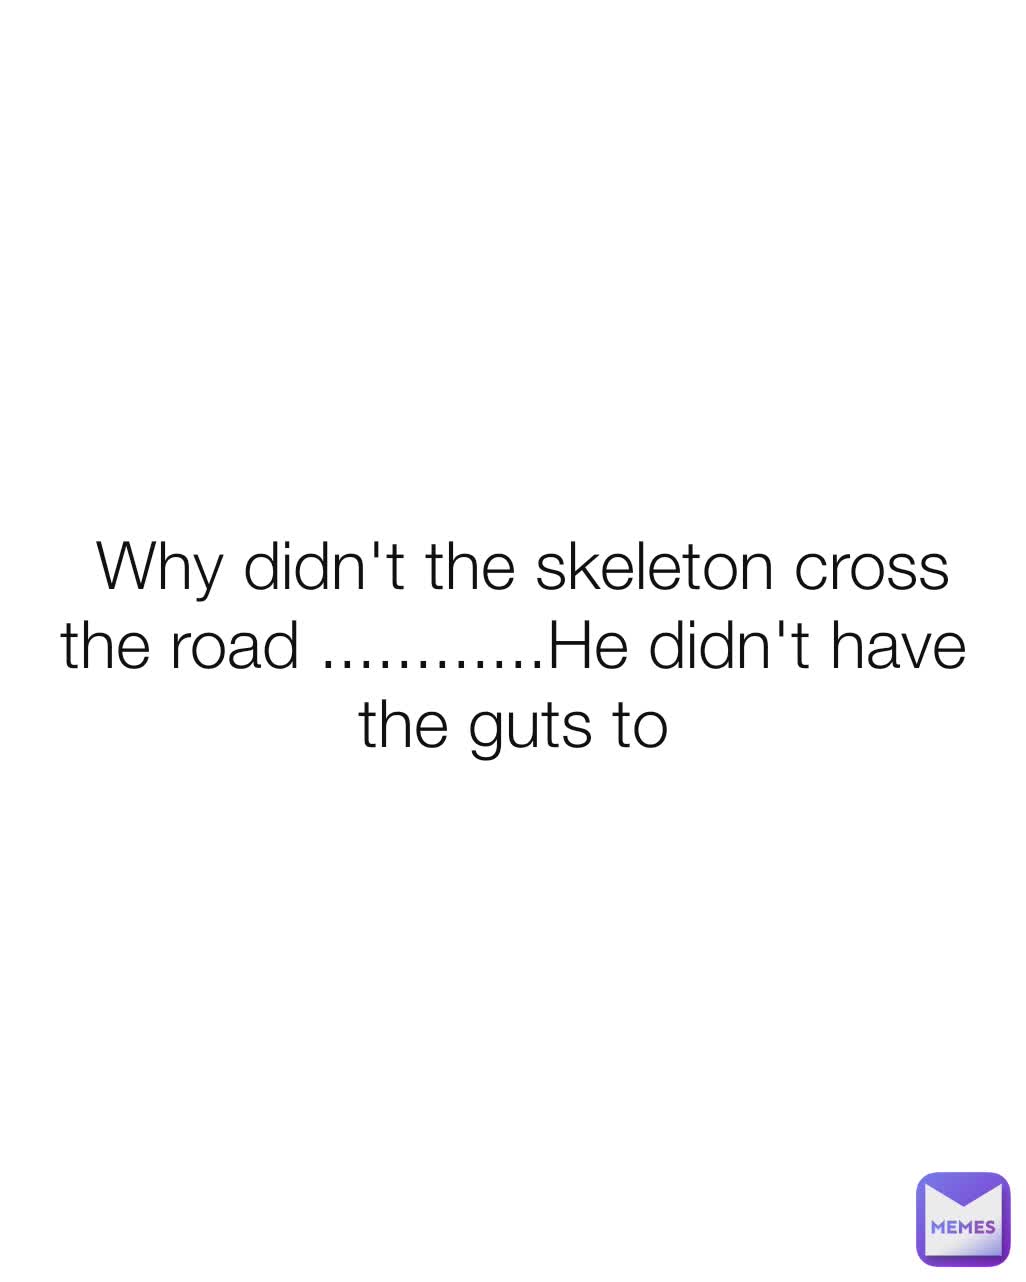 Why Didn t The Skeleton Cross The Road He Didn t Have The Guts To niclasmo234 Memes